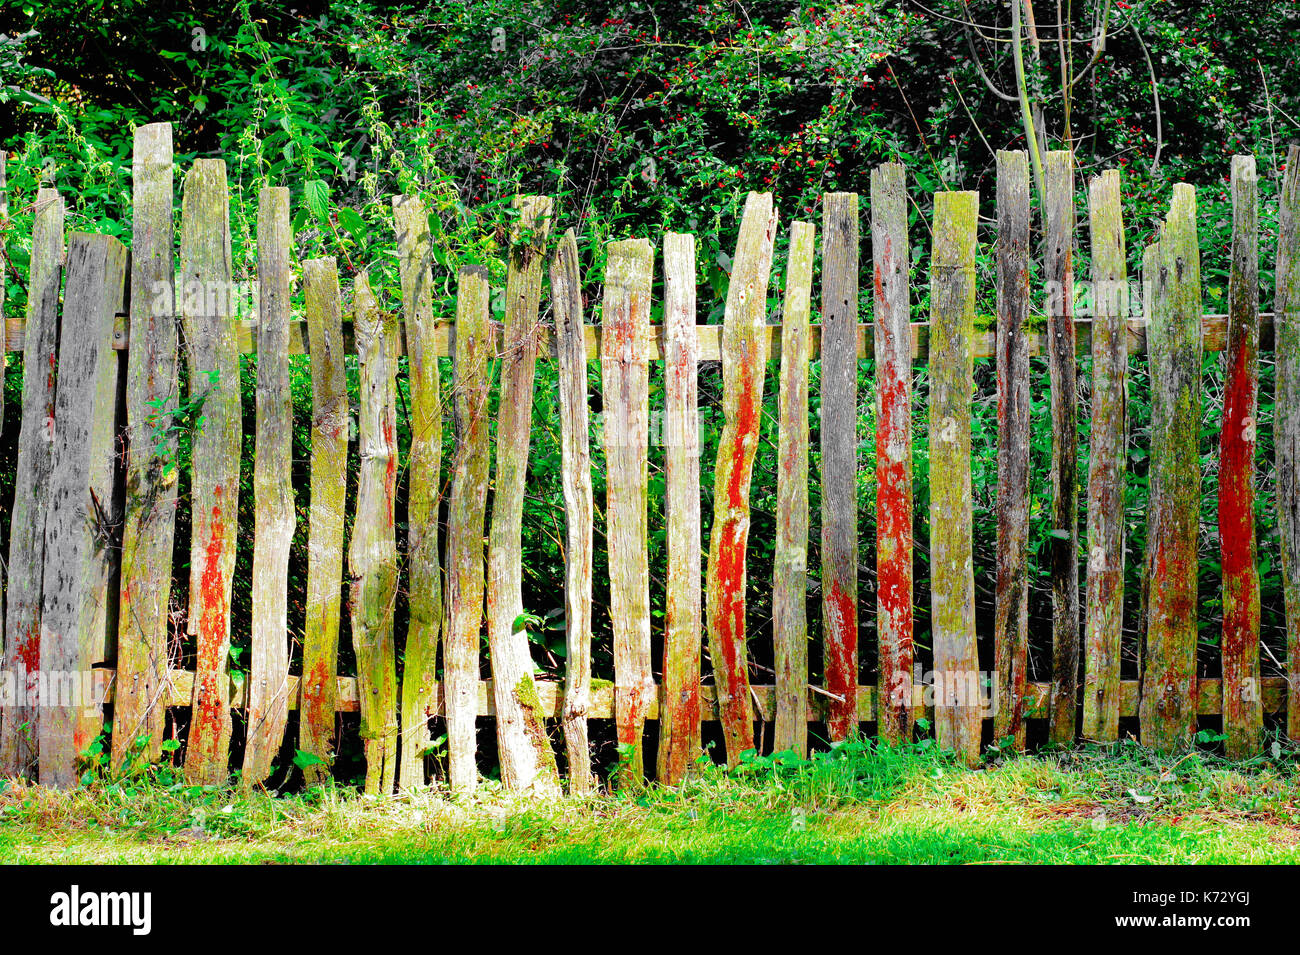 Part of an old picket fence Stock Photo